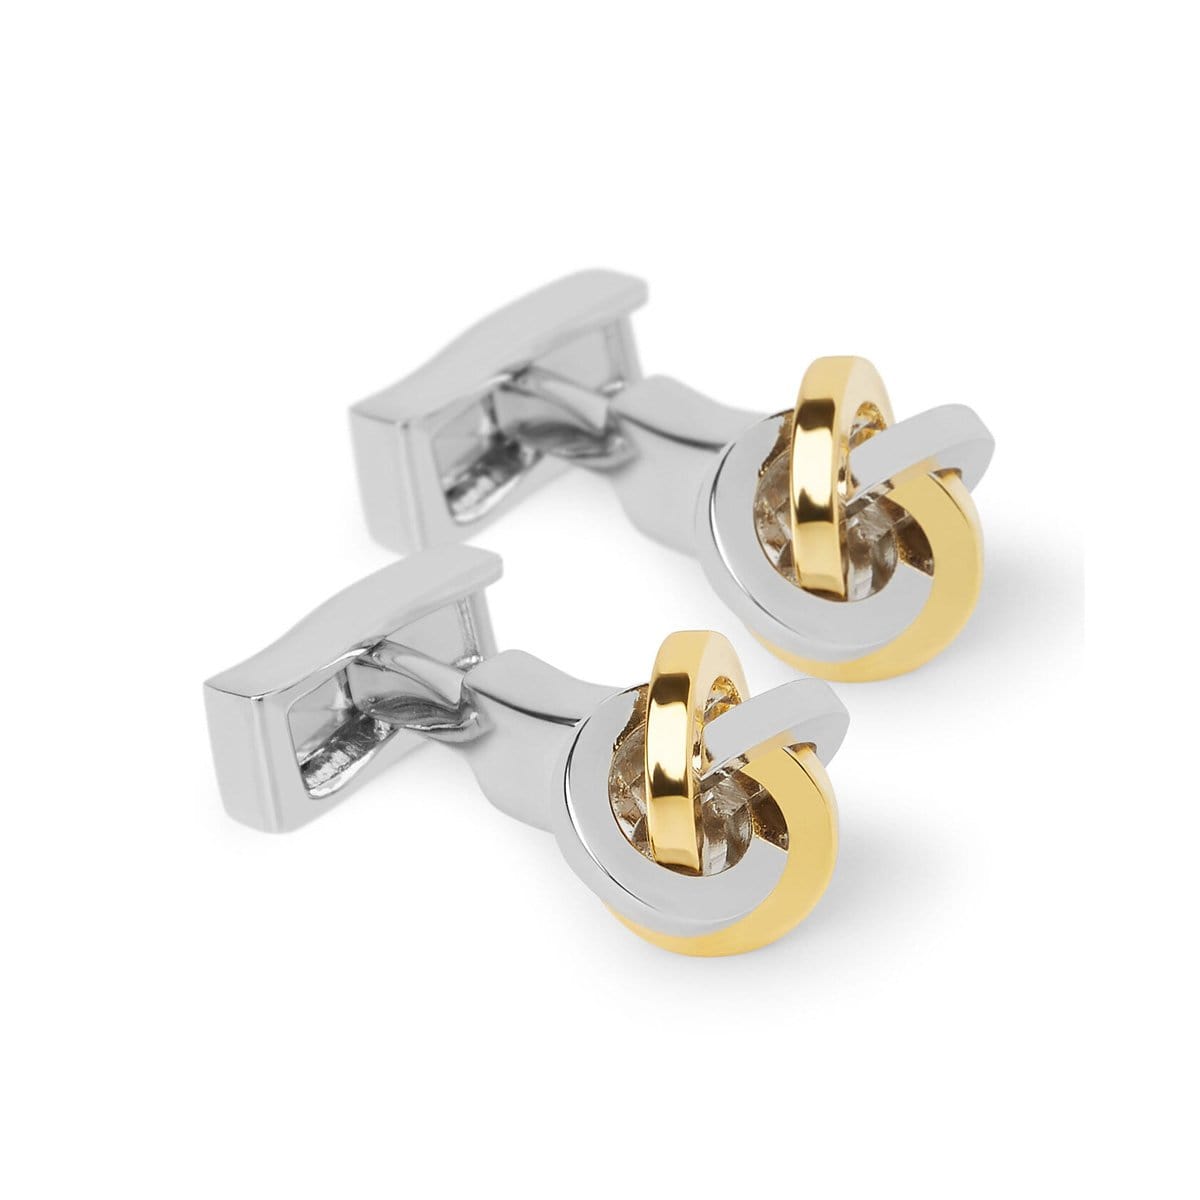 T.M.Lewin-Multi-Knot-Cufflink-Silver-and-Gold-70351-009